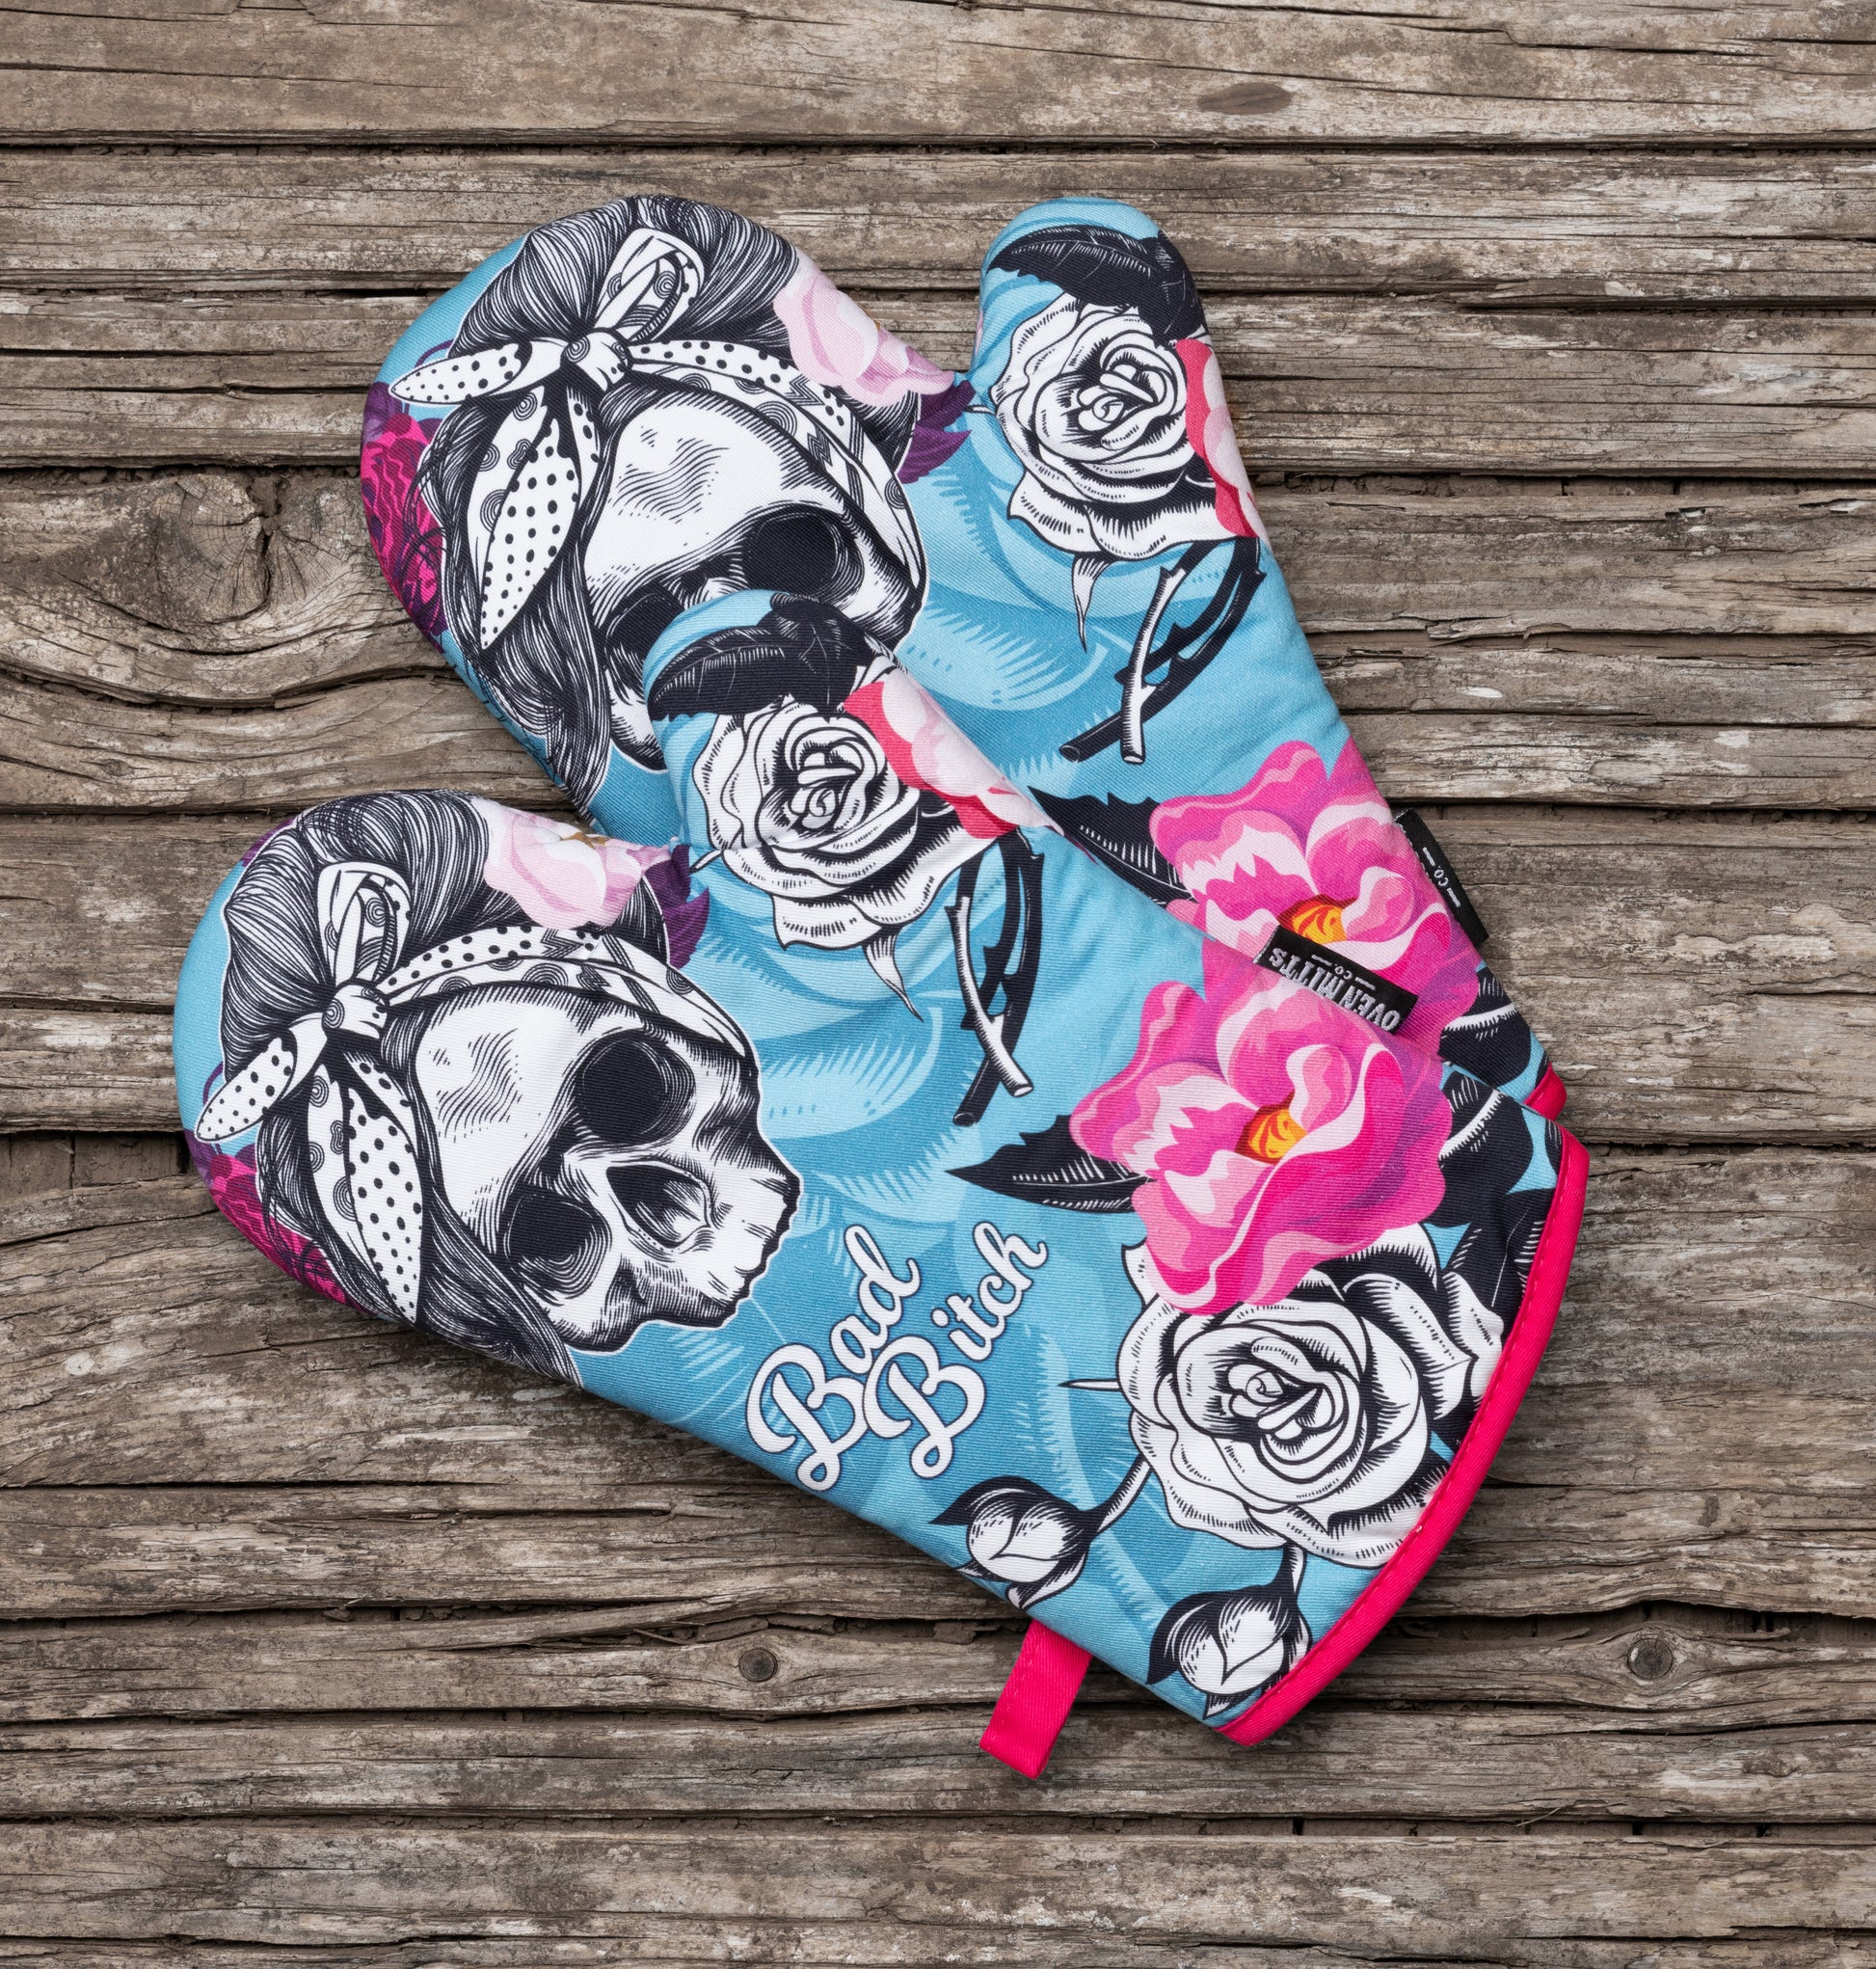 Bad Bitch Flower Skull Oven Mitts And Potholder Set, glove cool, funny gift